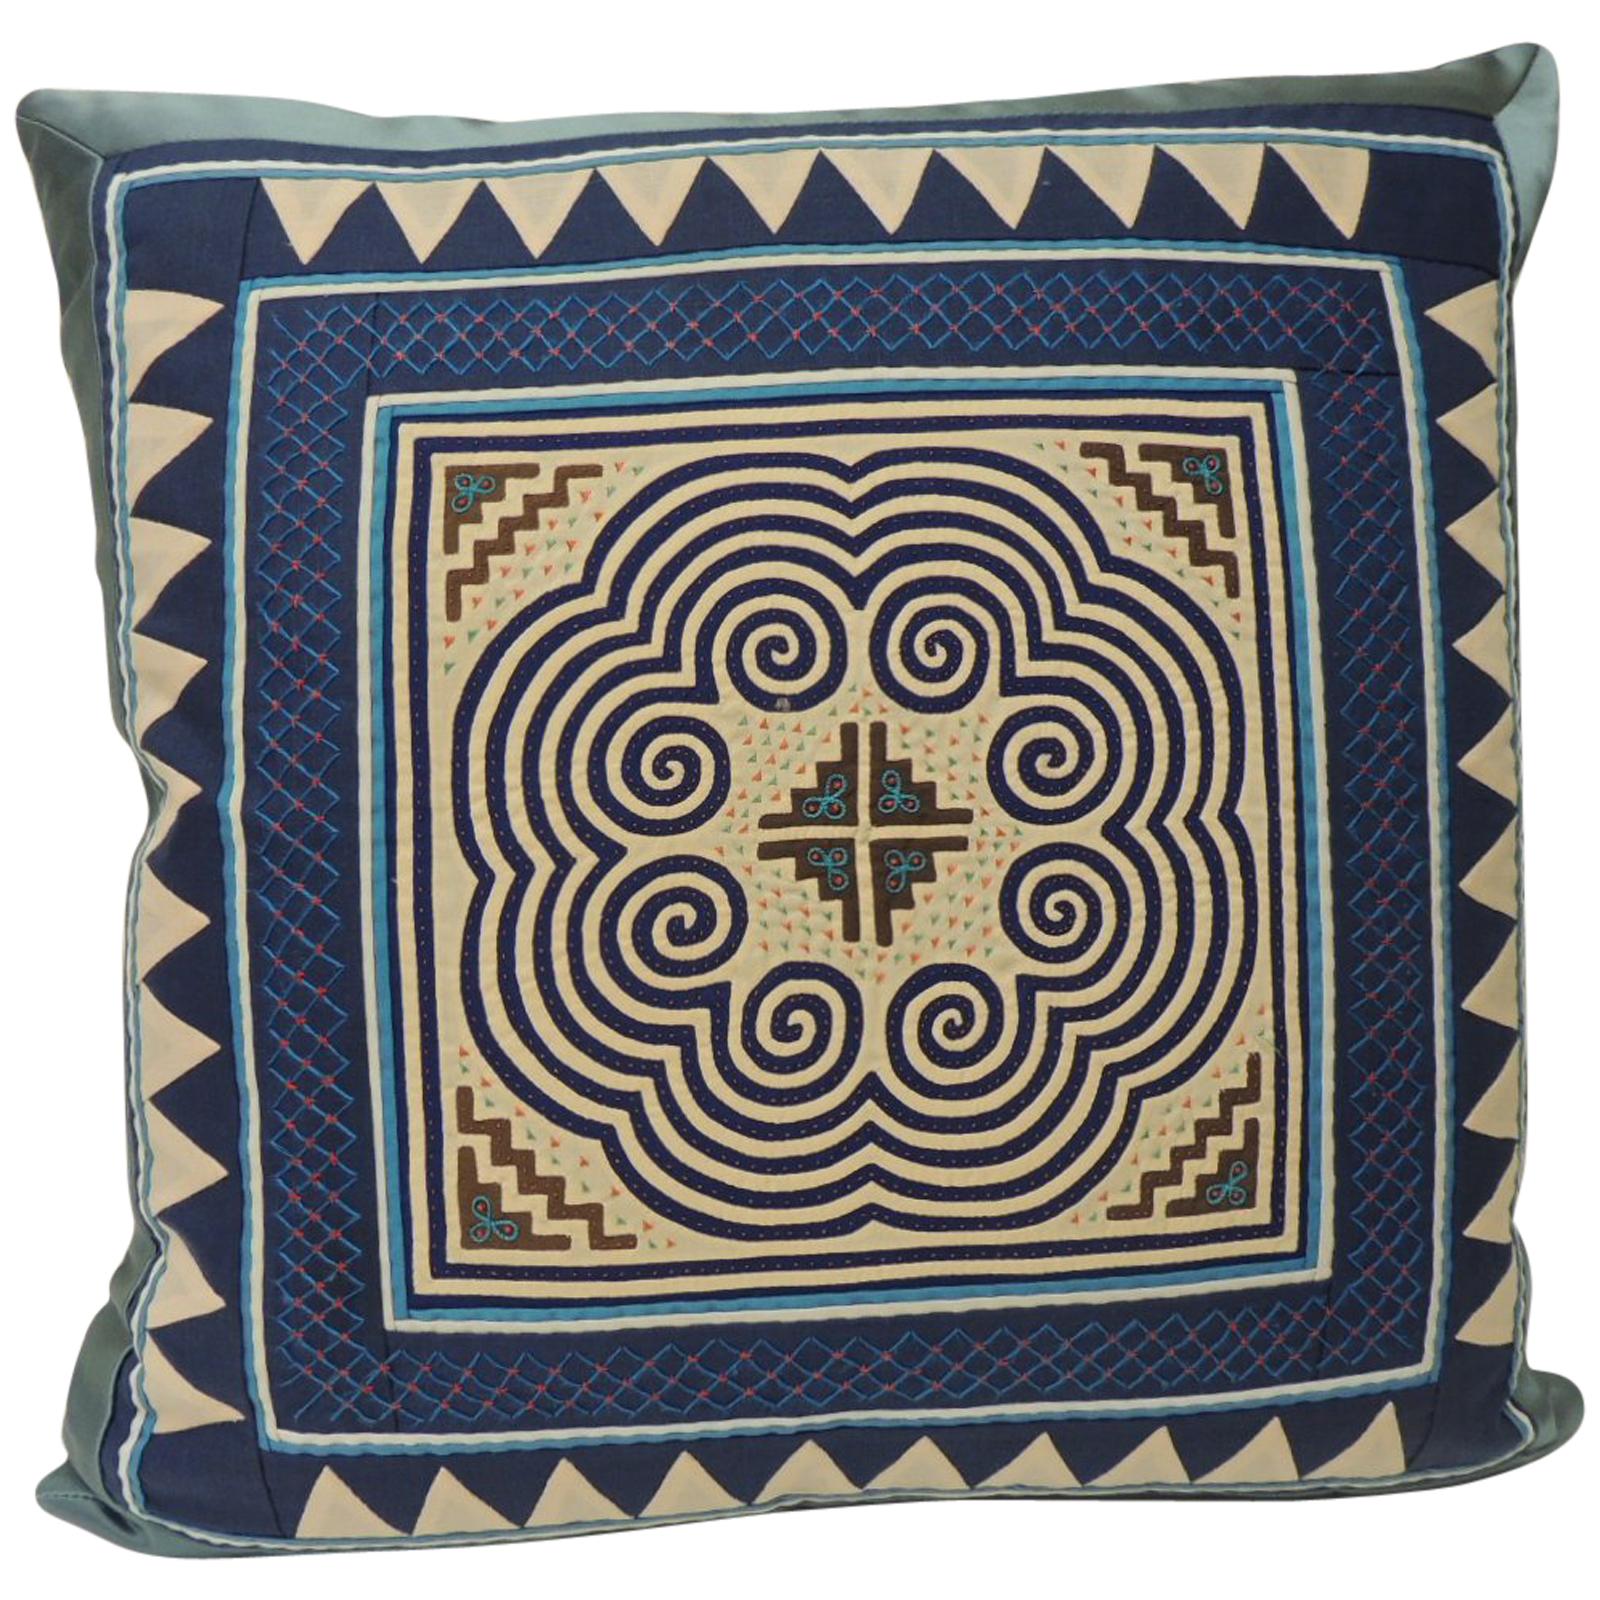 Vintage Asian Blue and Purple Applique Embroidered Square Pillow